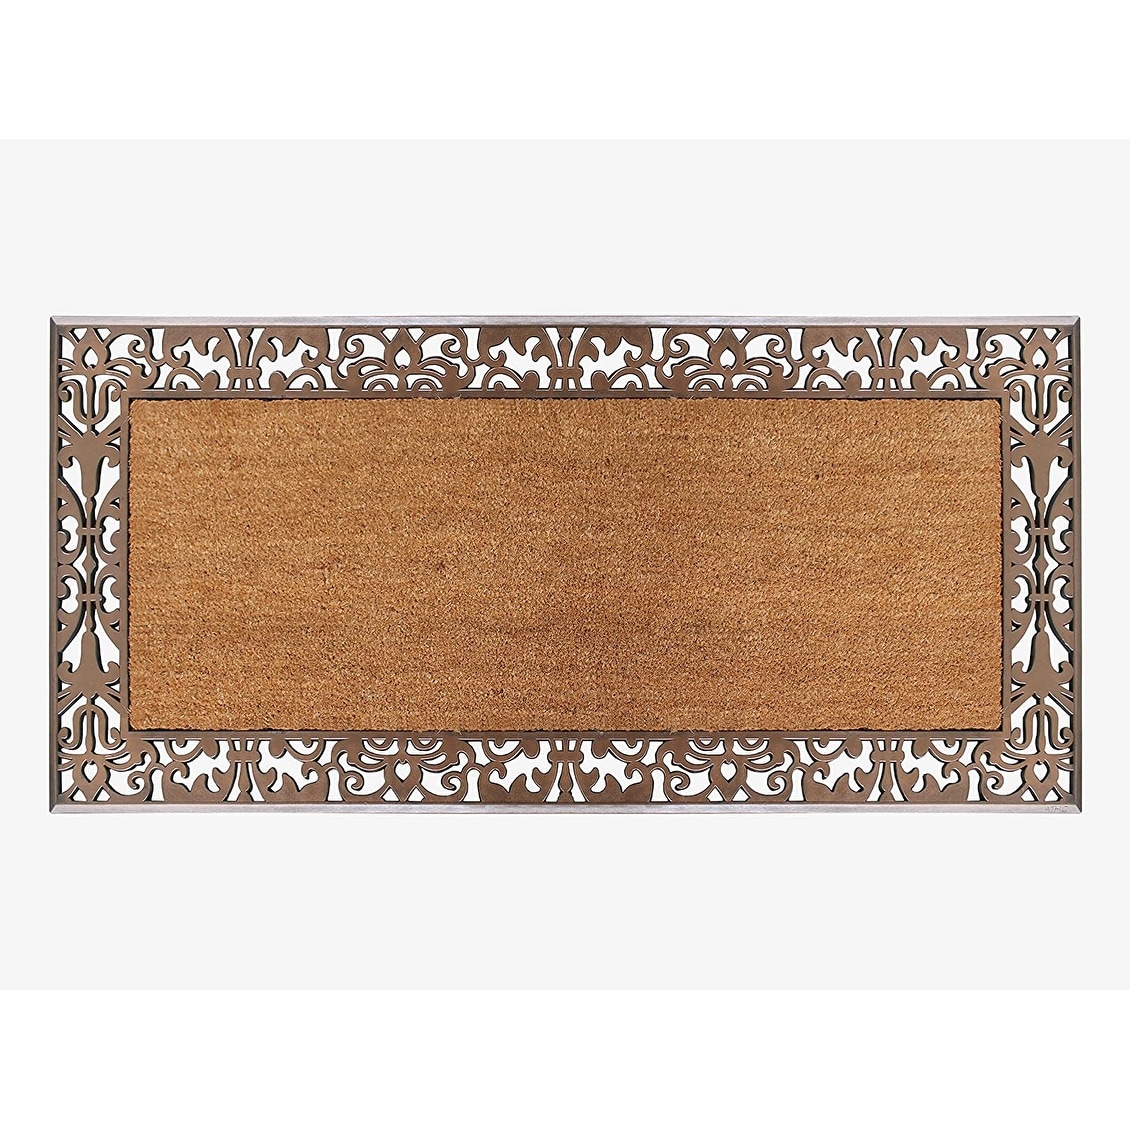 A1hc Natural Coir Monogrammed Door Mat for Front Door, 30 inch x 60 inch, Anti-Shed Treated Durable Doormat for Outdoor Entrance, Heavy Duty, Low